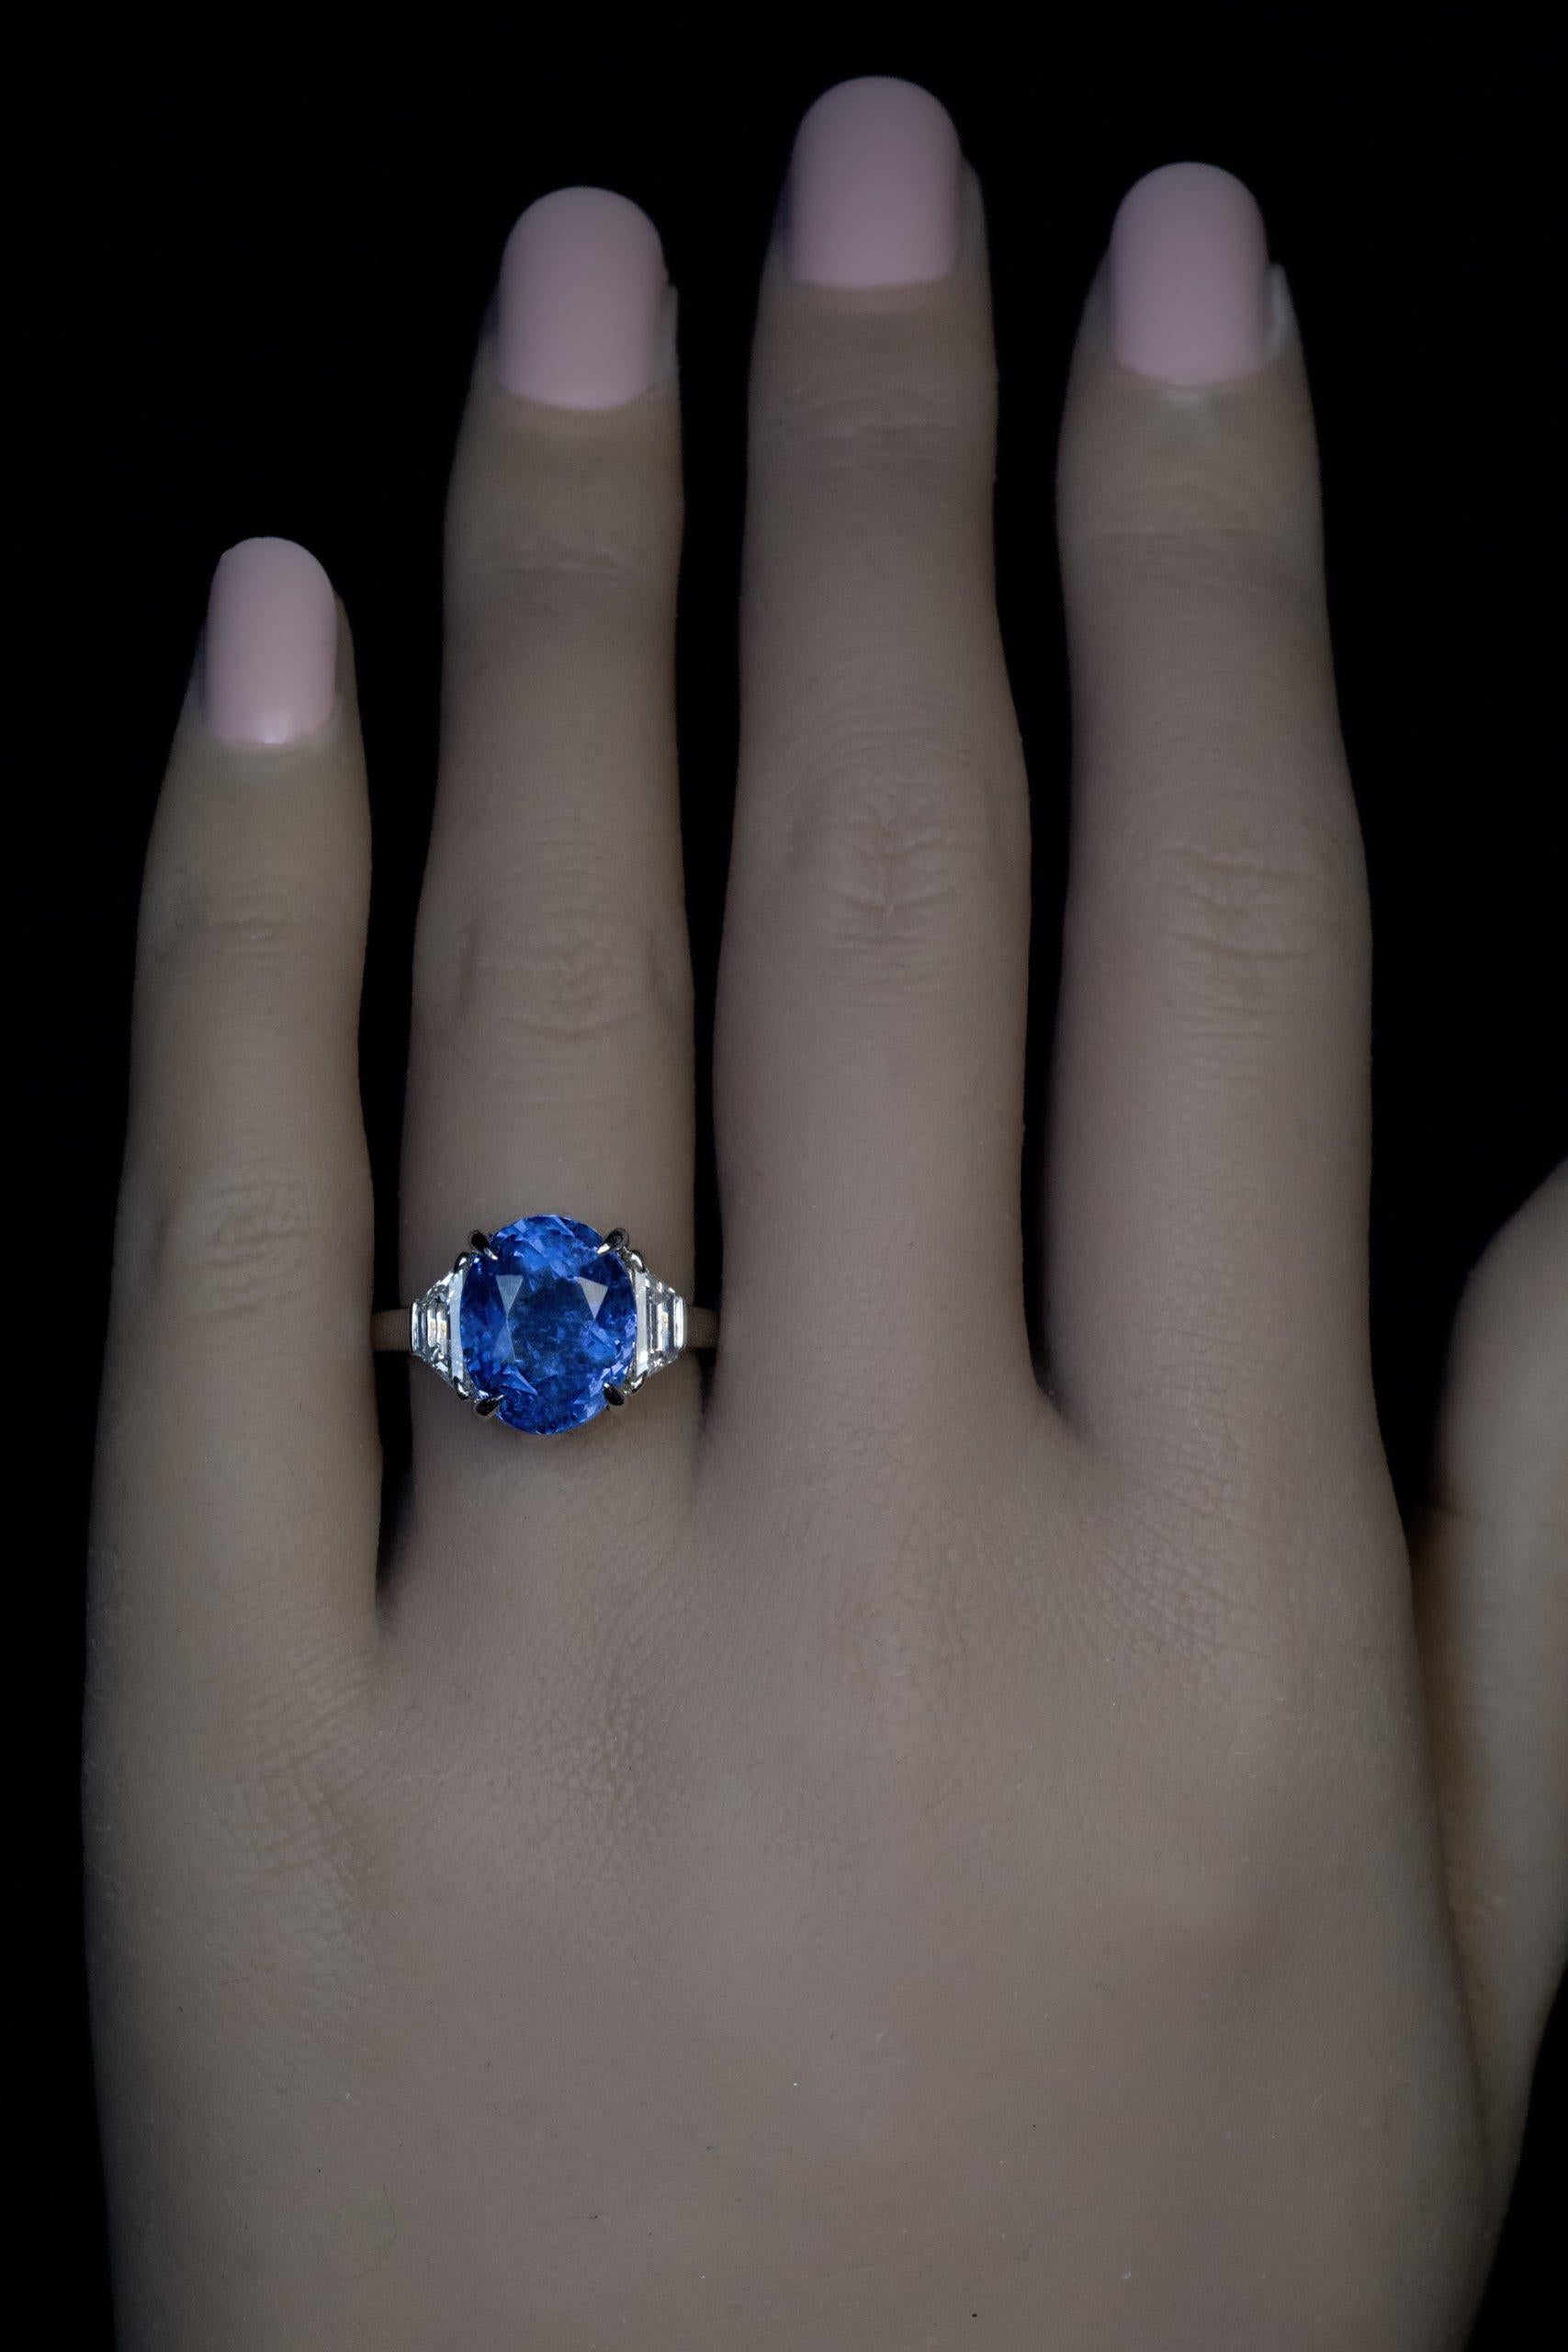 This contemporary custom-made platinum engagement ring features a 9.67 carat natural unheated Ceylon sapphire of a very nice rich medium blue color. The sapphire is flanked by two bright white trapezoid cut diamonds (G color, VS1 / SI2 clarity). 